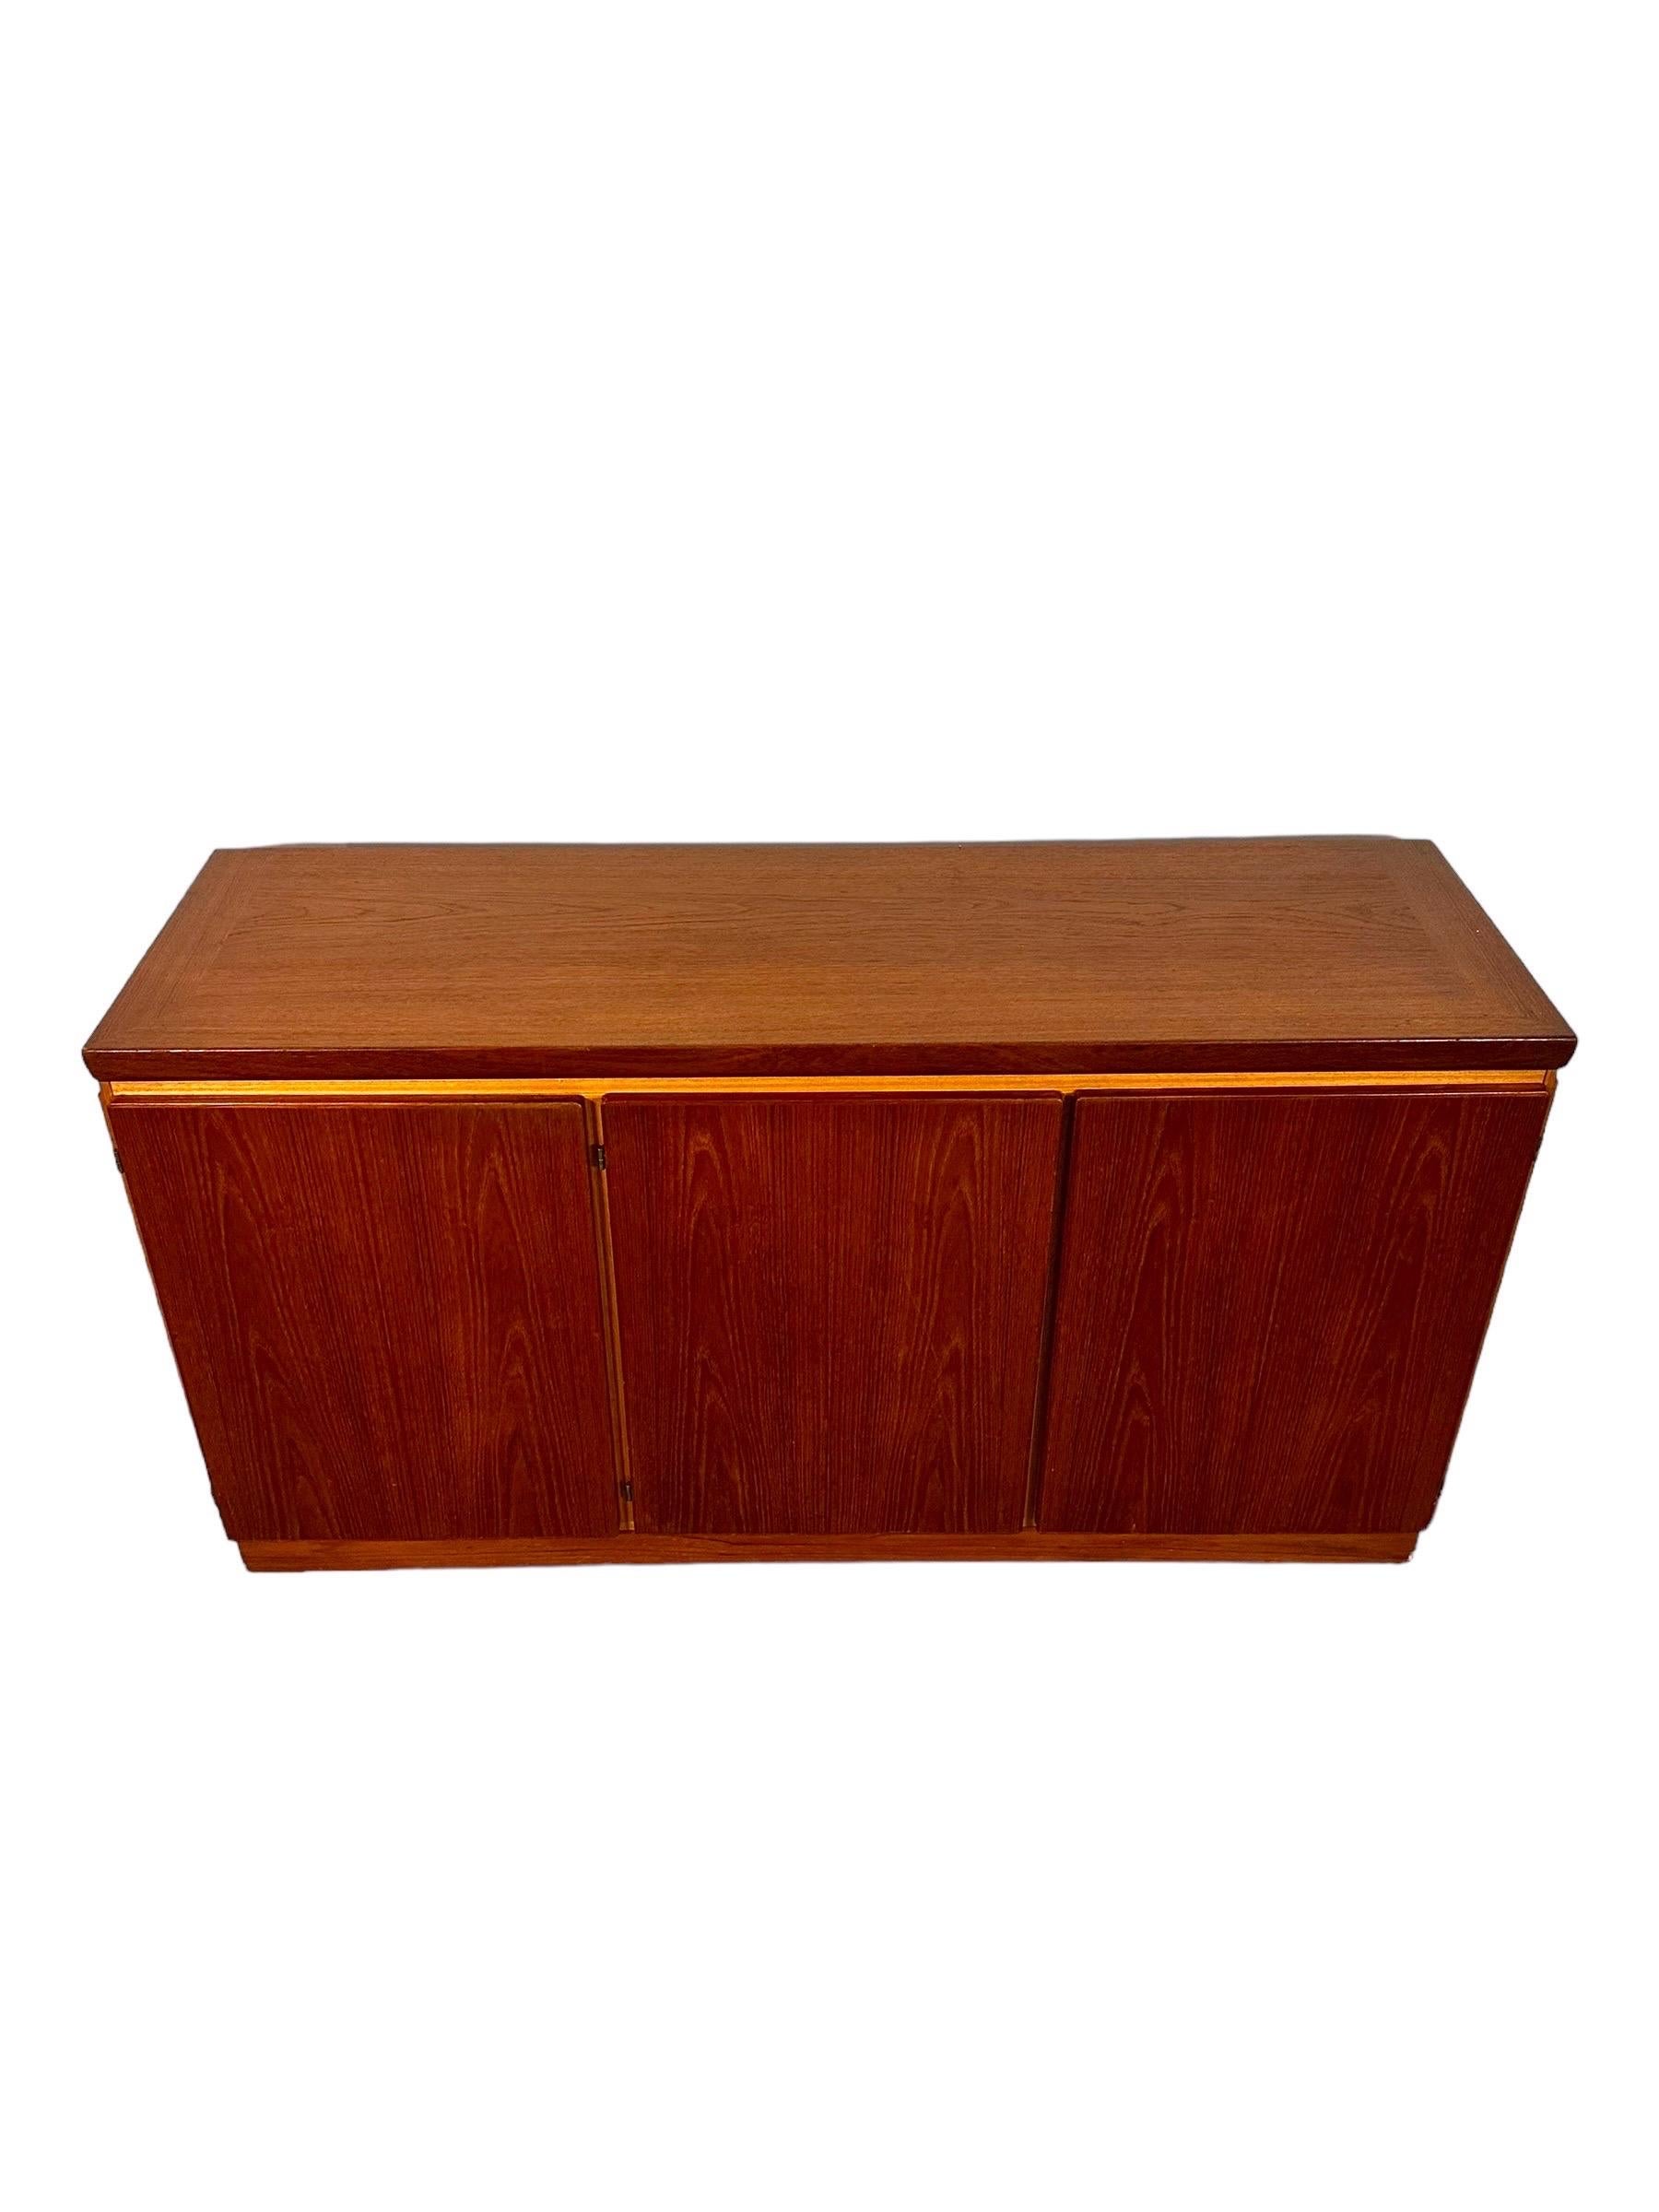 Introducing this sleek Mid Century Danish Modern Teak Credenza, a timeless piece embodying the minimalist aesthetics of the era. At 60.25 inches in width, 19 inches in depth, and 32 inches in height, it offers ample storage space without